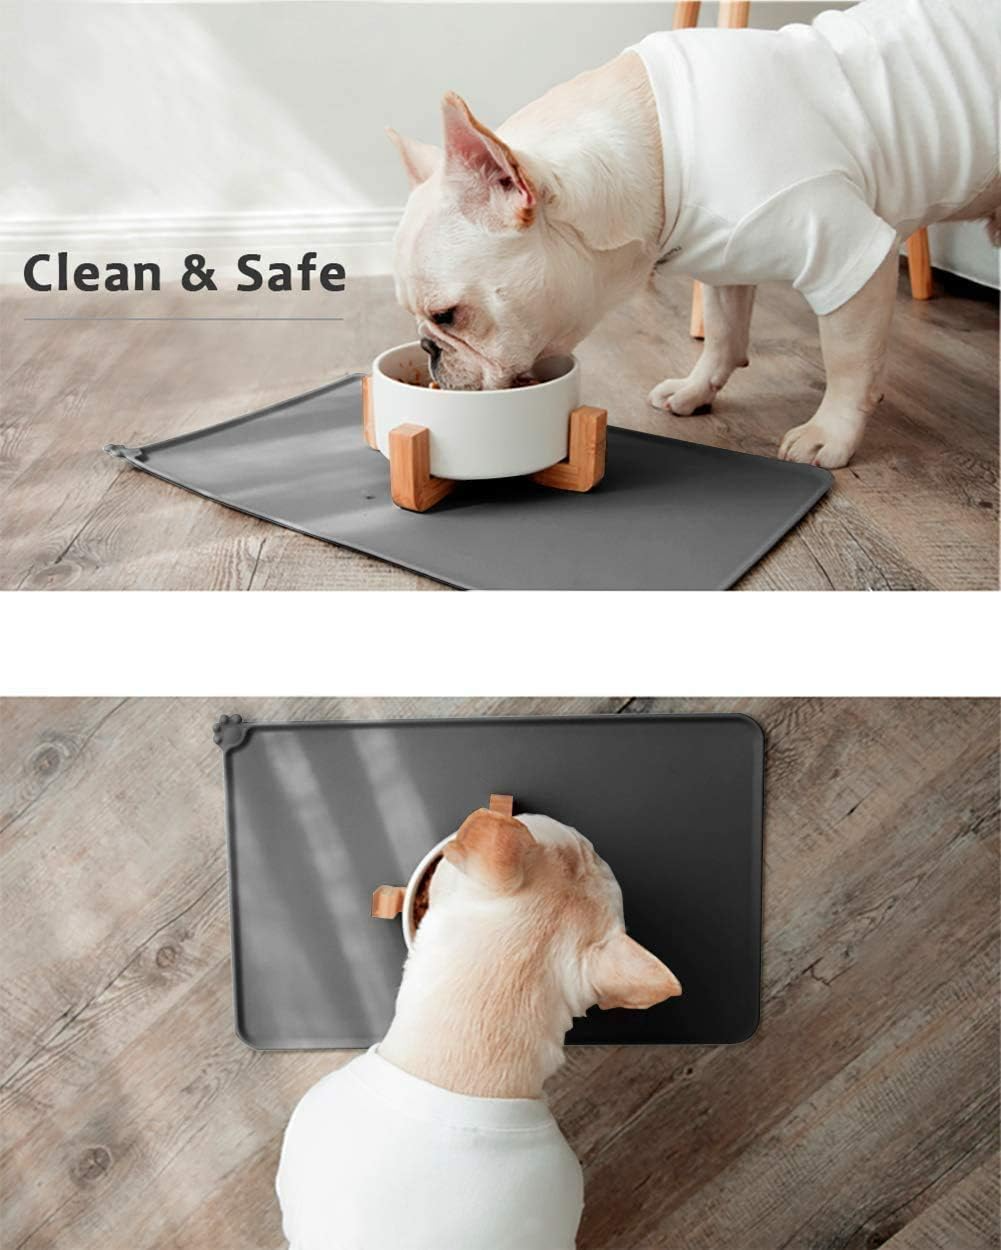 Dog Cat Bowl Food Mat with High Lips Silicone Non-Stick Waterproof Pet Food Feeding Pad Puppy Feeder Tray Water Cushion Placemat